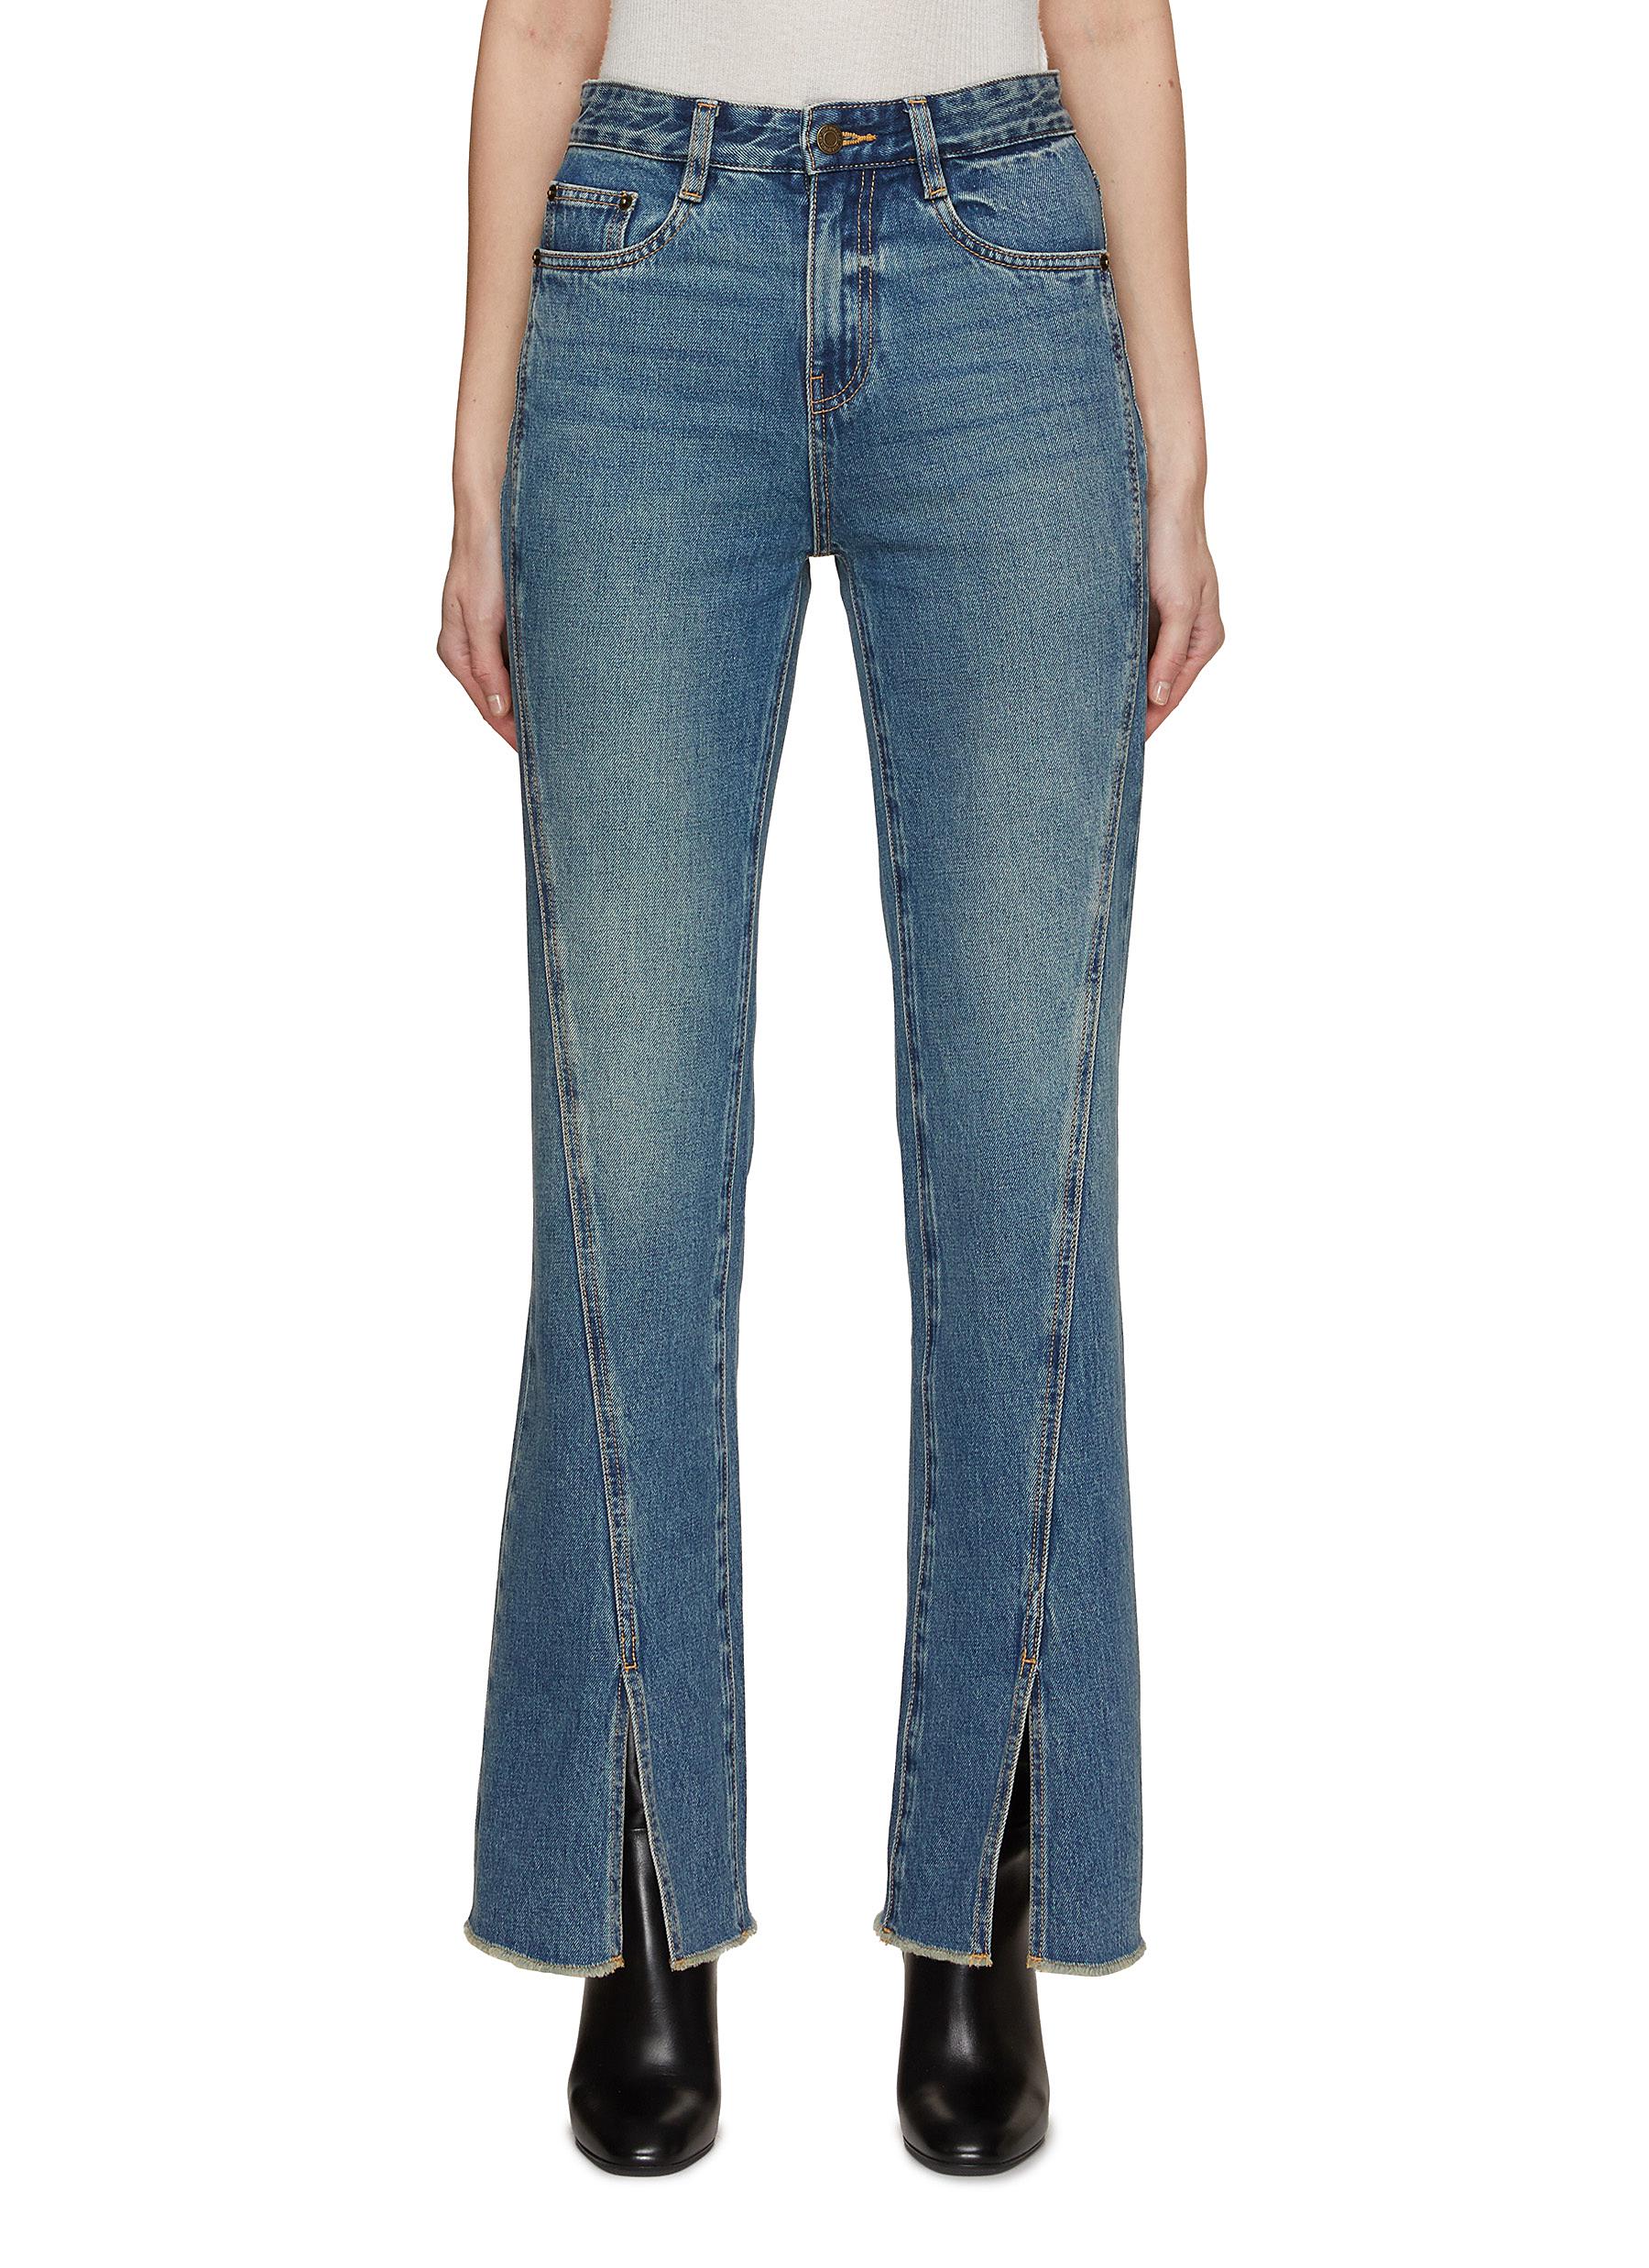 MO&CO., Front Slit Jeans, Women